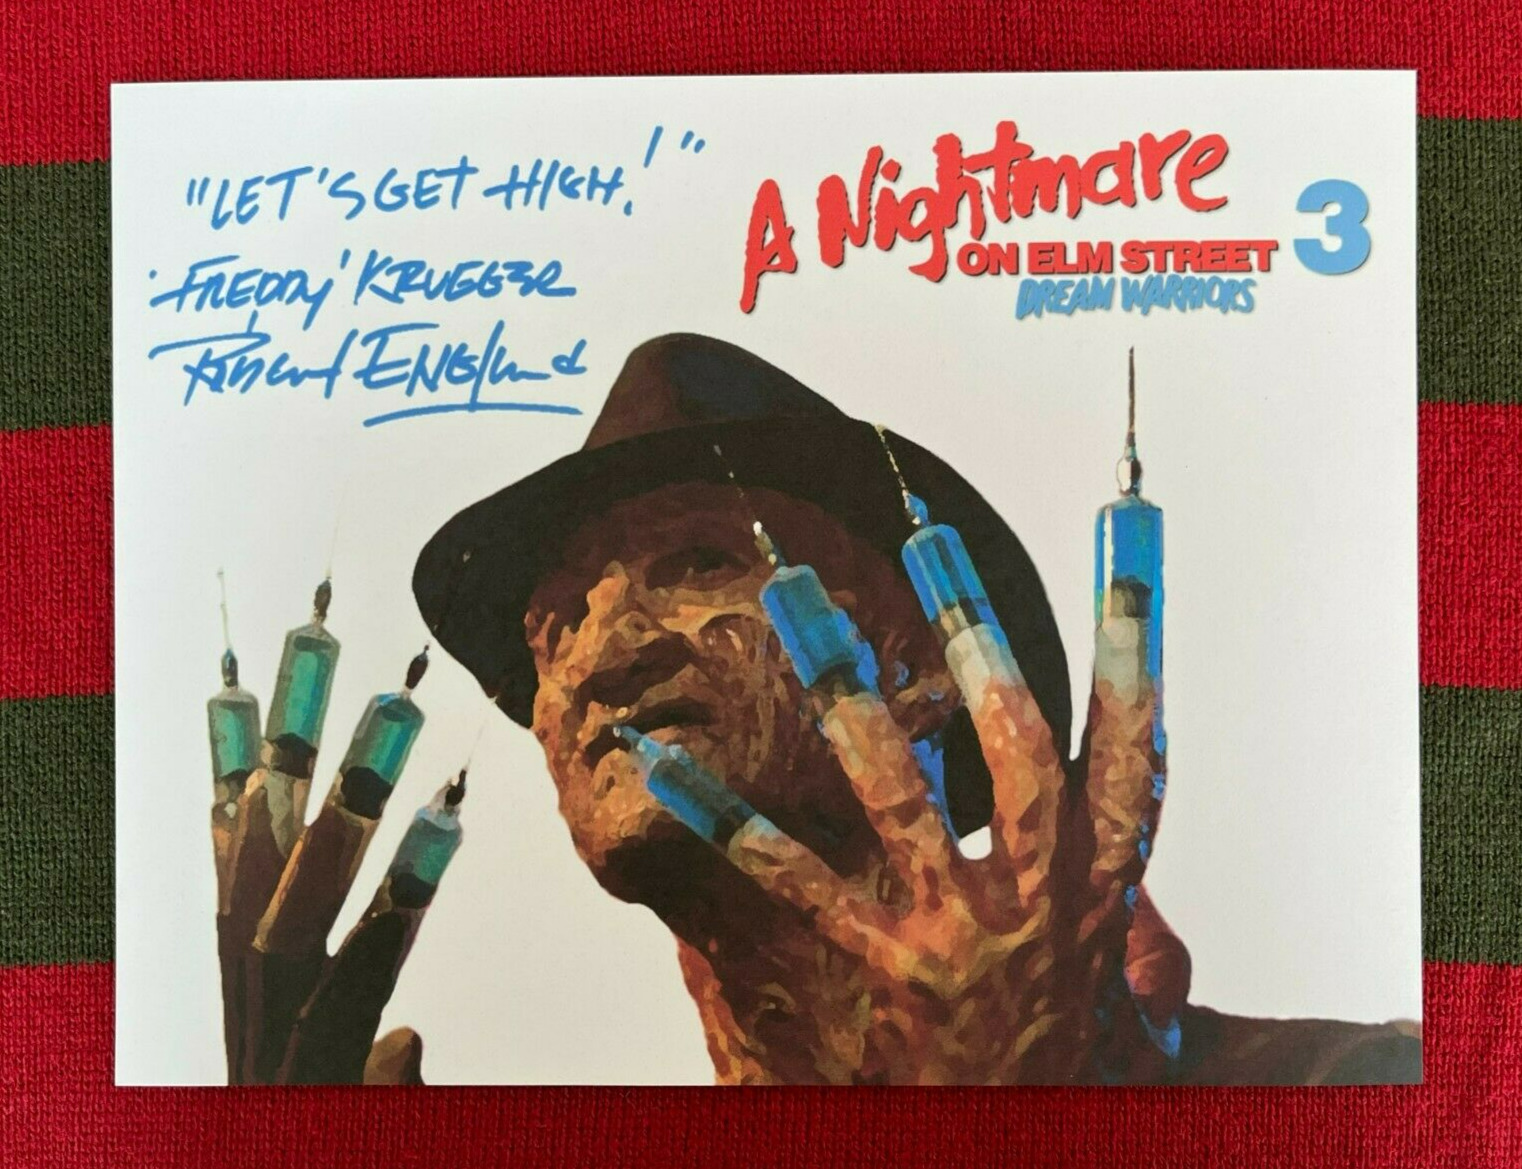 A Nightmare On Elm Street 3 "let's Get High" Signed Picture- Autograph Reprints